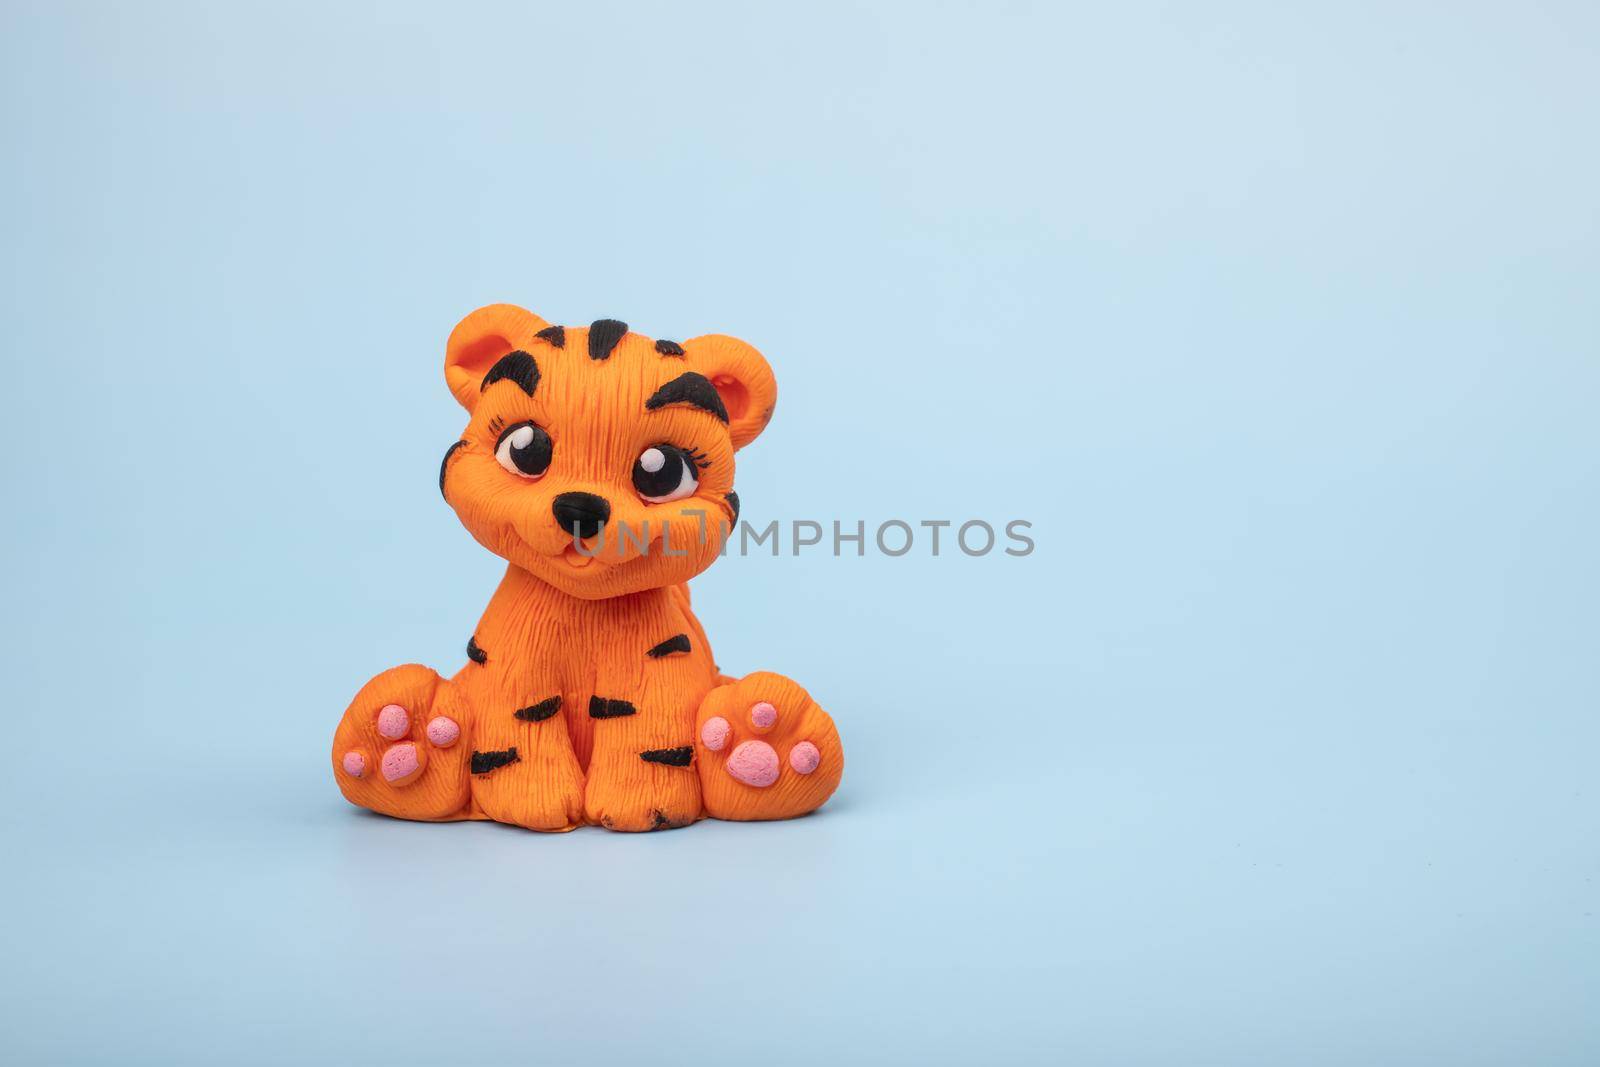 A hand-sculpted orange tiger figurine on a blue background. The year 2022 is the year of the tiger according to the Eastern calendar.